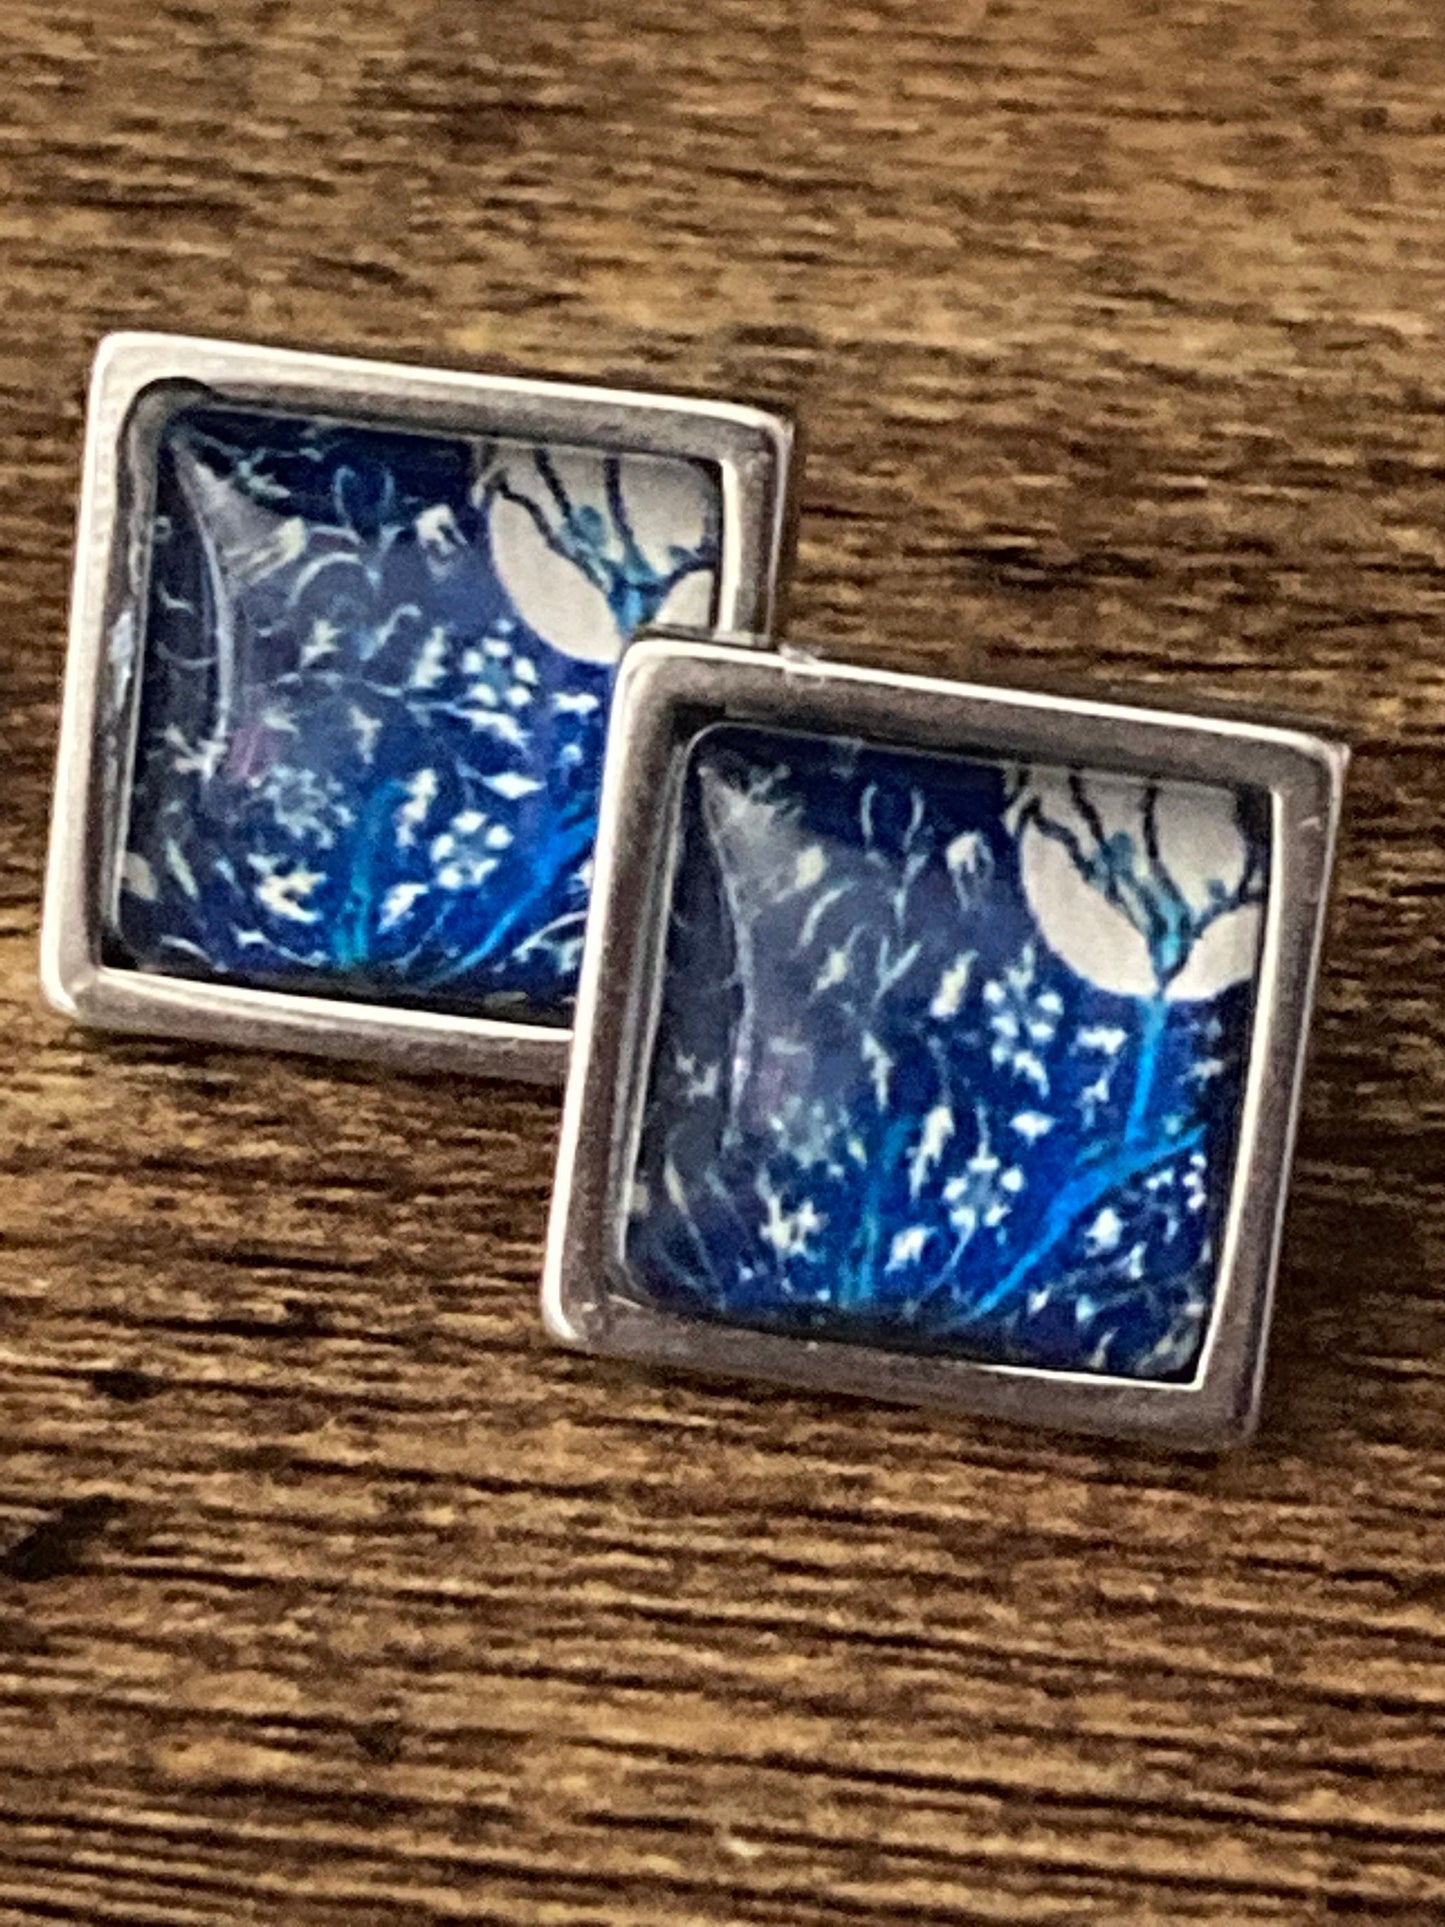 stainless steel 1.5cm square William Morris tulip print glass stud cabochon earrings